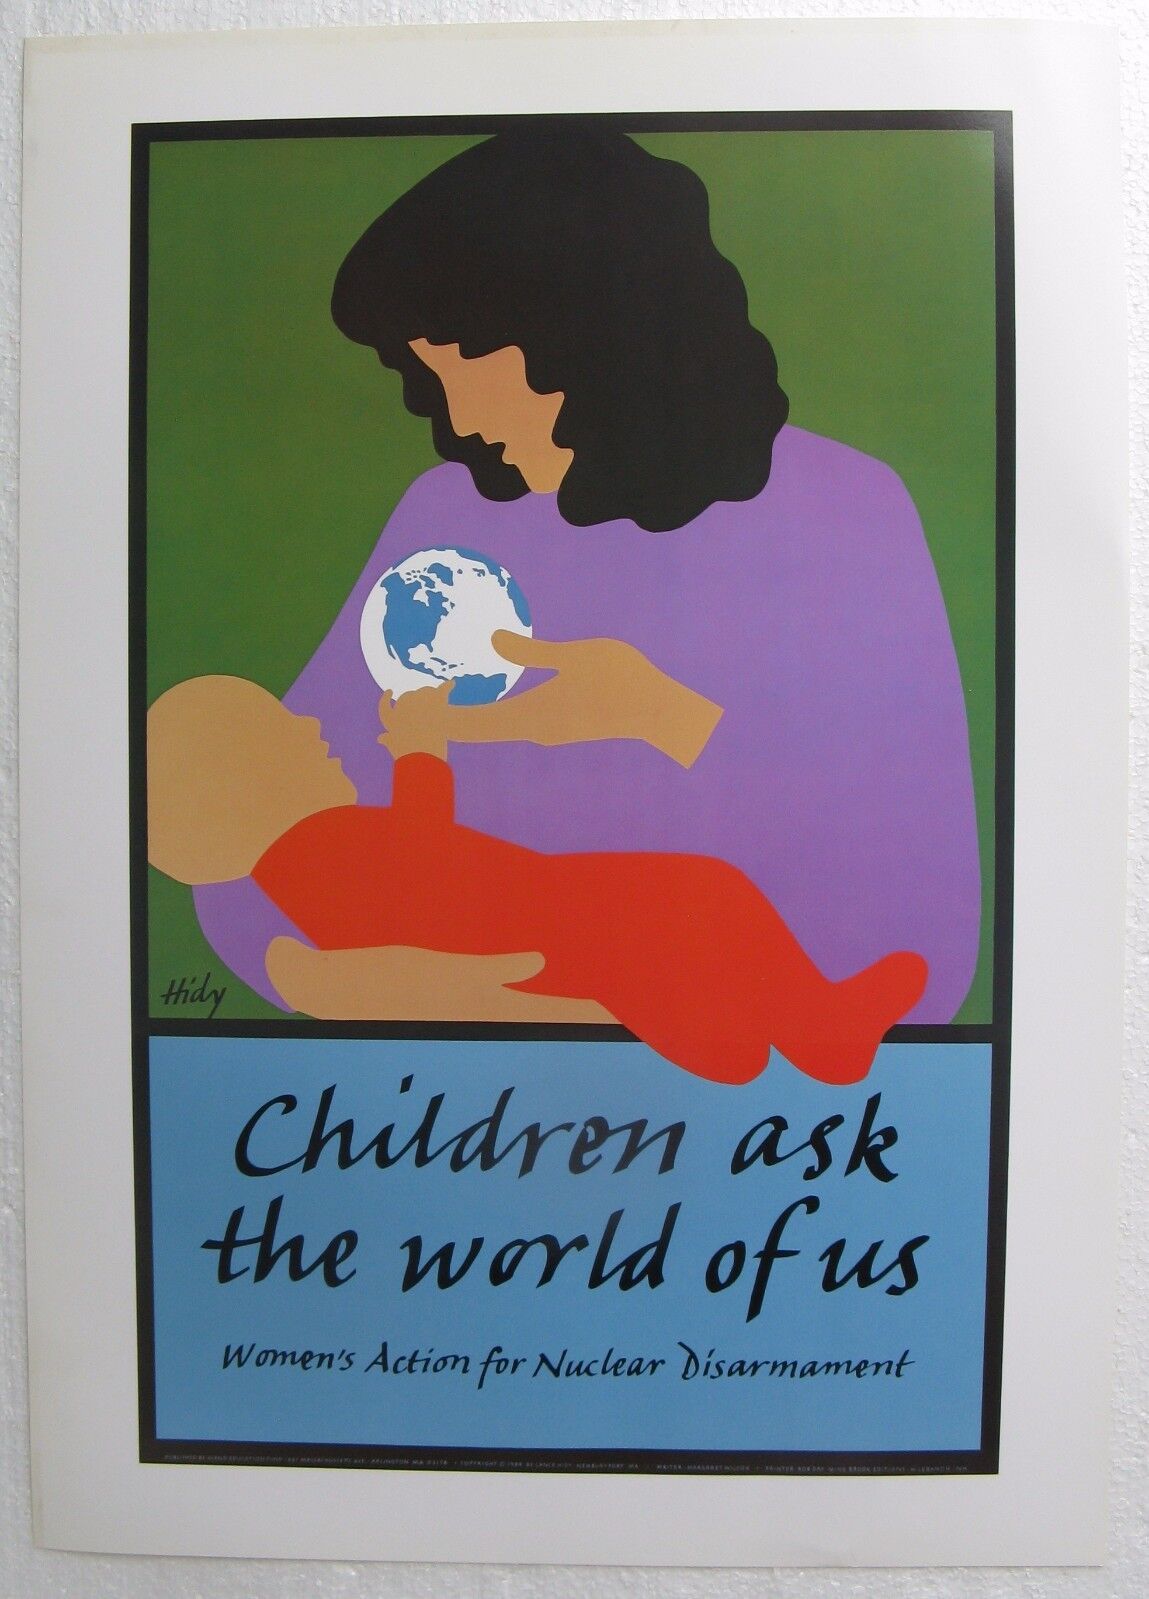 Lance Hidy - Children Ask the World of Us - Vintage Nuclear Disarmament Poster